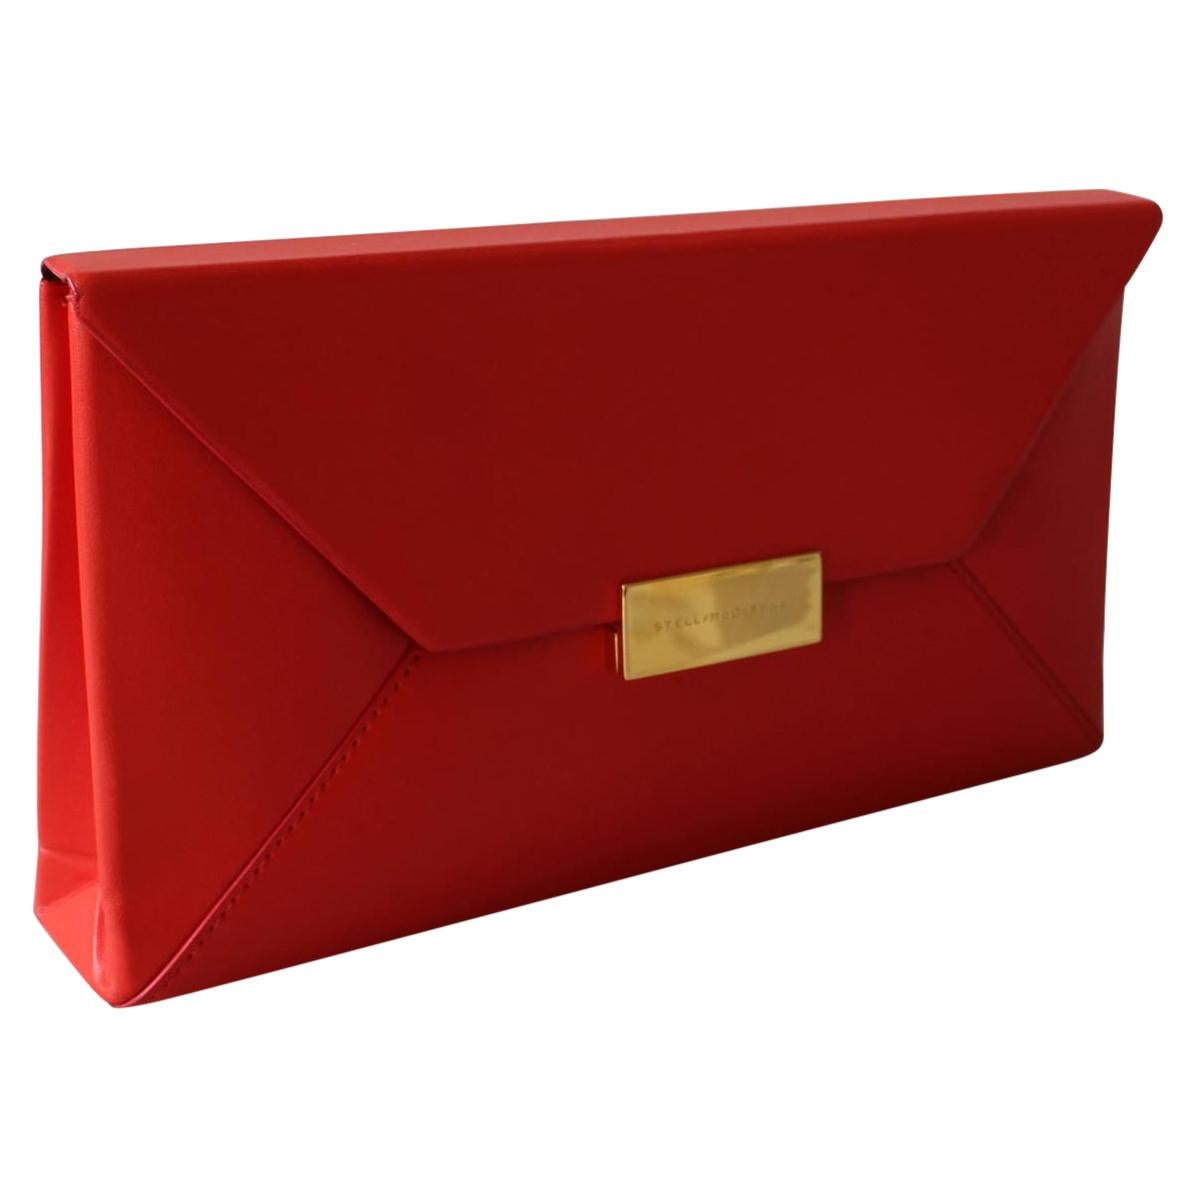 Very chic pochette by Stella McCartney
Ecoleather
Red color
Magnetic closure with golden plate
Cm 26 x 14 x 5 (10.2 x 5.5 x 1.96 inches)
With dustbag
Little pen mark on the bottom, like in the photo
Worldwide express shipping included in the price !